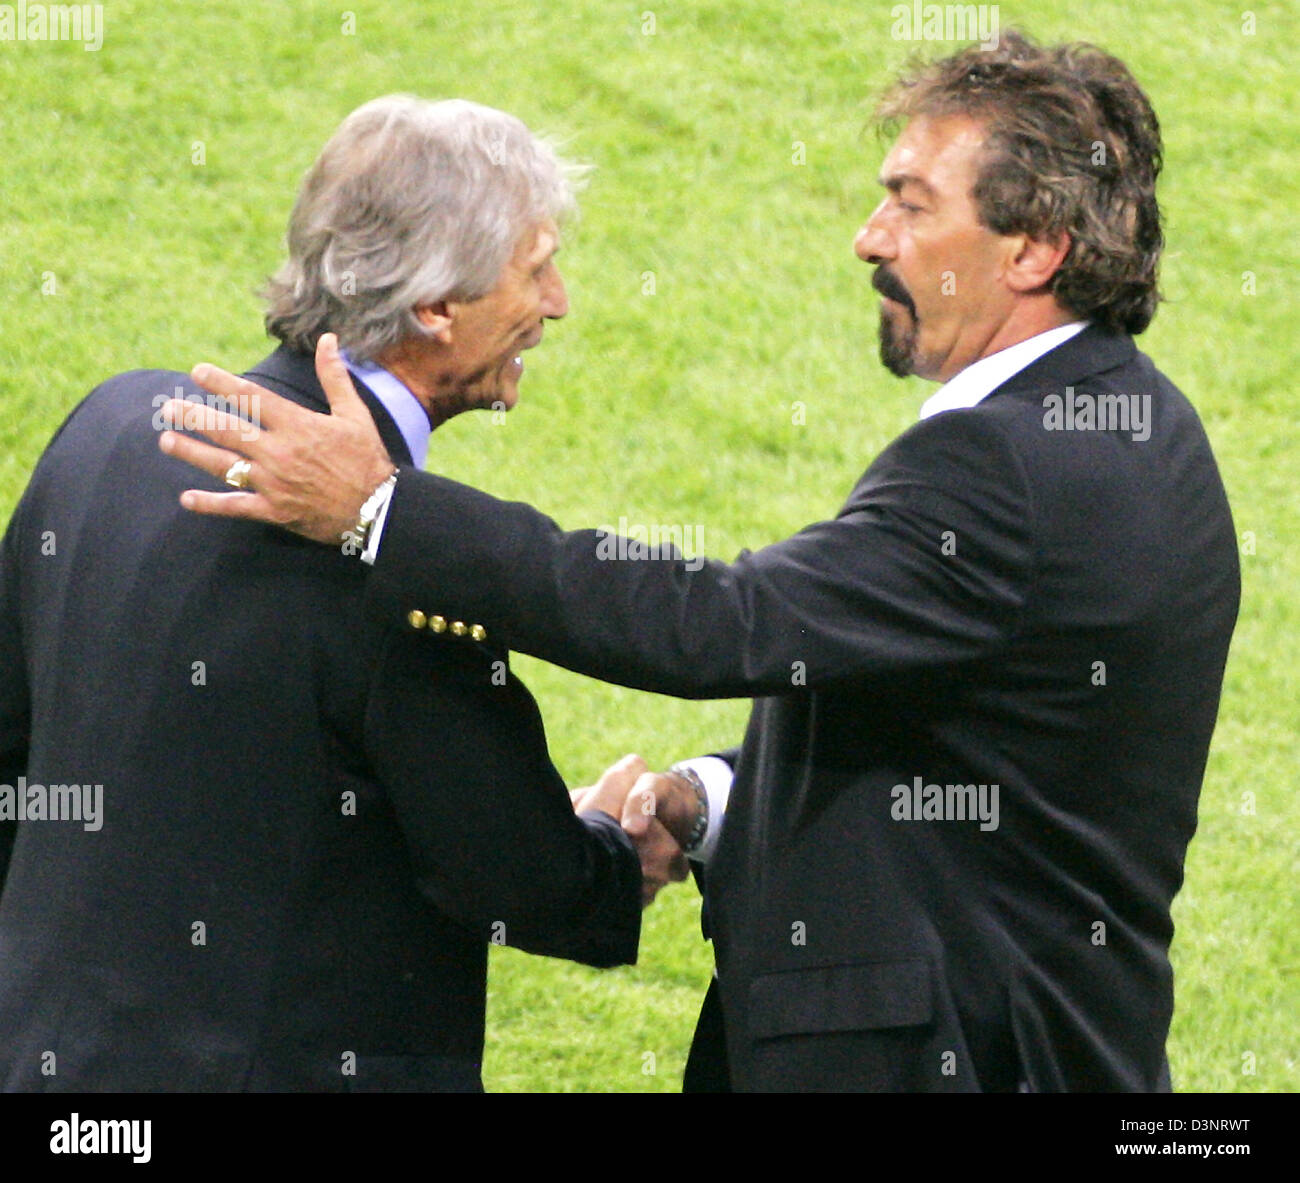 Mexican head coach Ricardo la Volpe (R) congratulates Argentinian head coach Jose Pekerman after the 2nd round match of 2006 FIFA World Cup between Argentina and Mexico at the FIFA World Cup stadium in Leipzig, Germany, Saturday, 24 June 2006. Argentina won 2-1 in extra time. DPA/JAN WOITAS +++ Mobile Services OUT +++ Please refer to FIFA's Terms and Conditions. Stock Photo